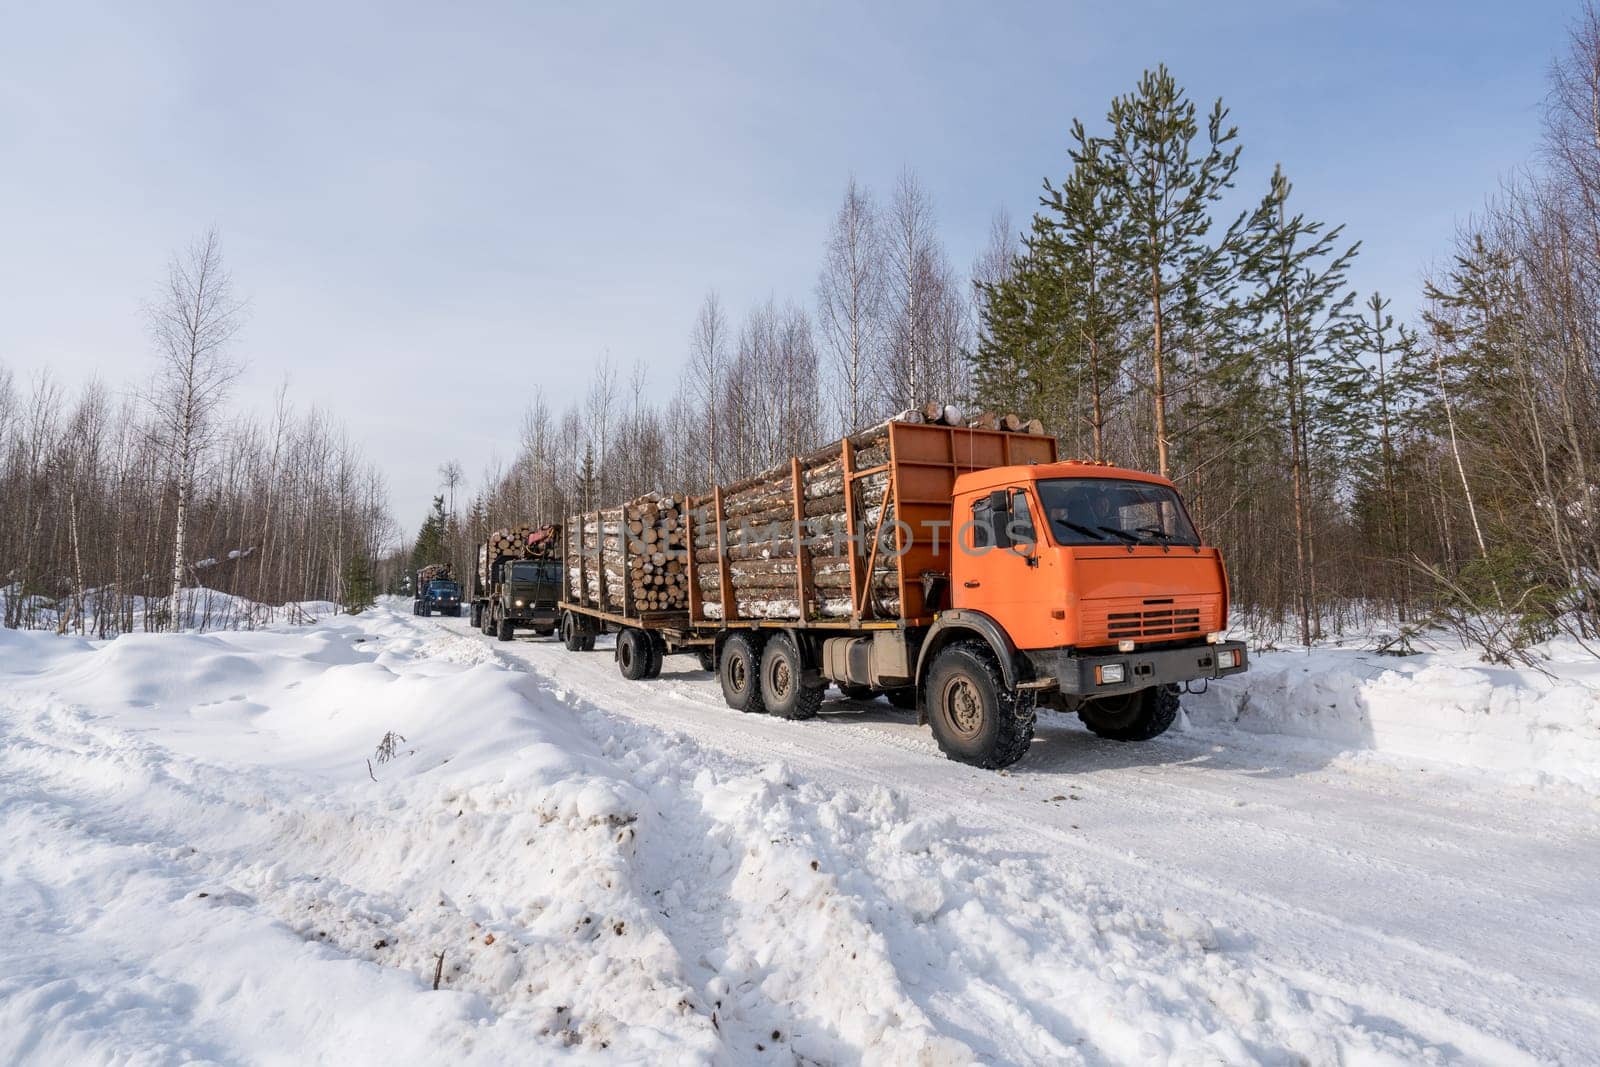 Trucks loaded with timber move out of woods by rivertime